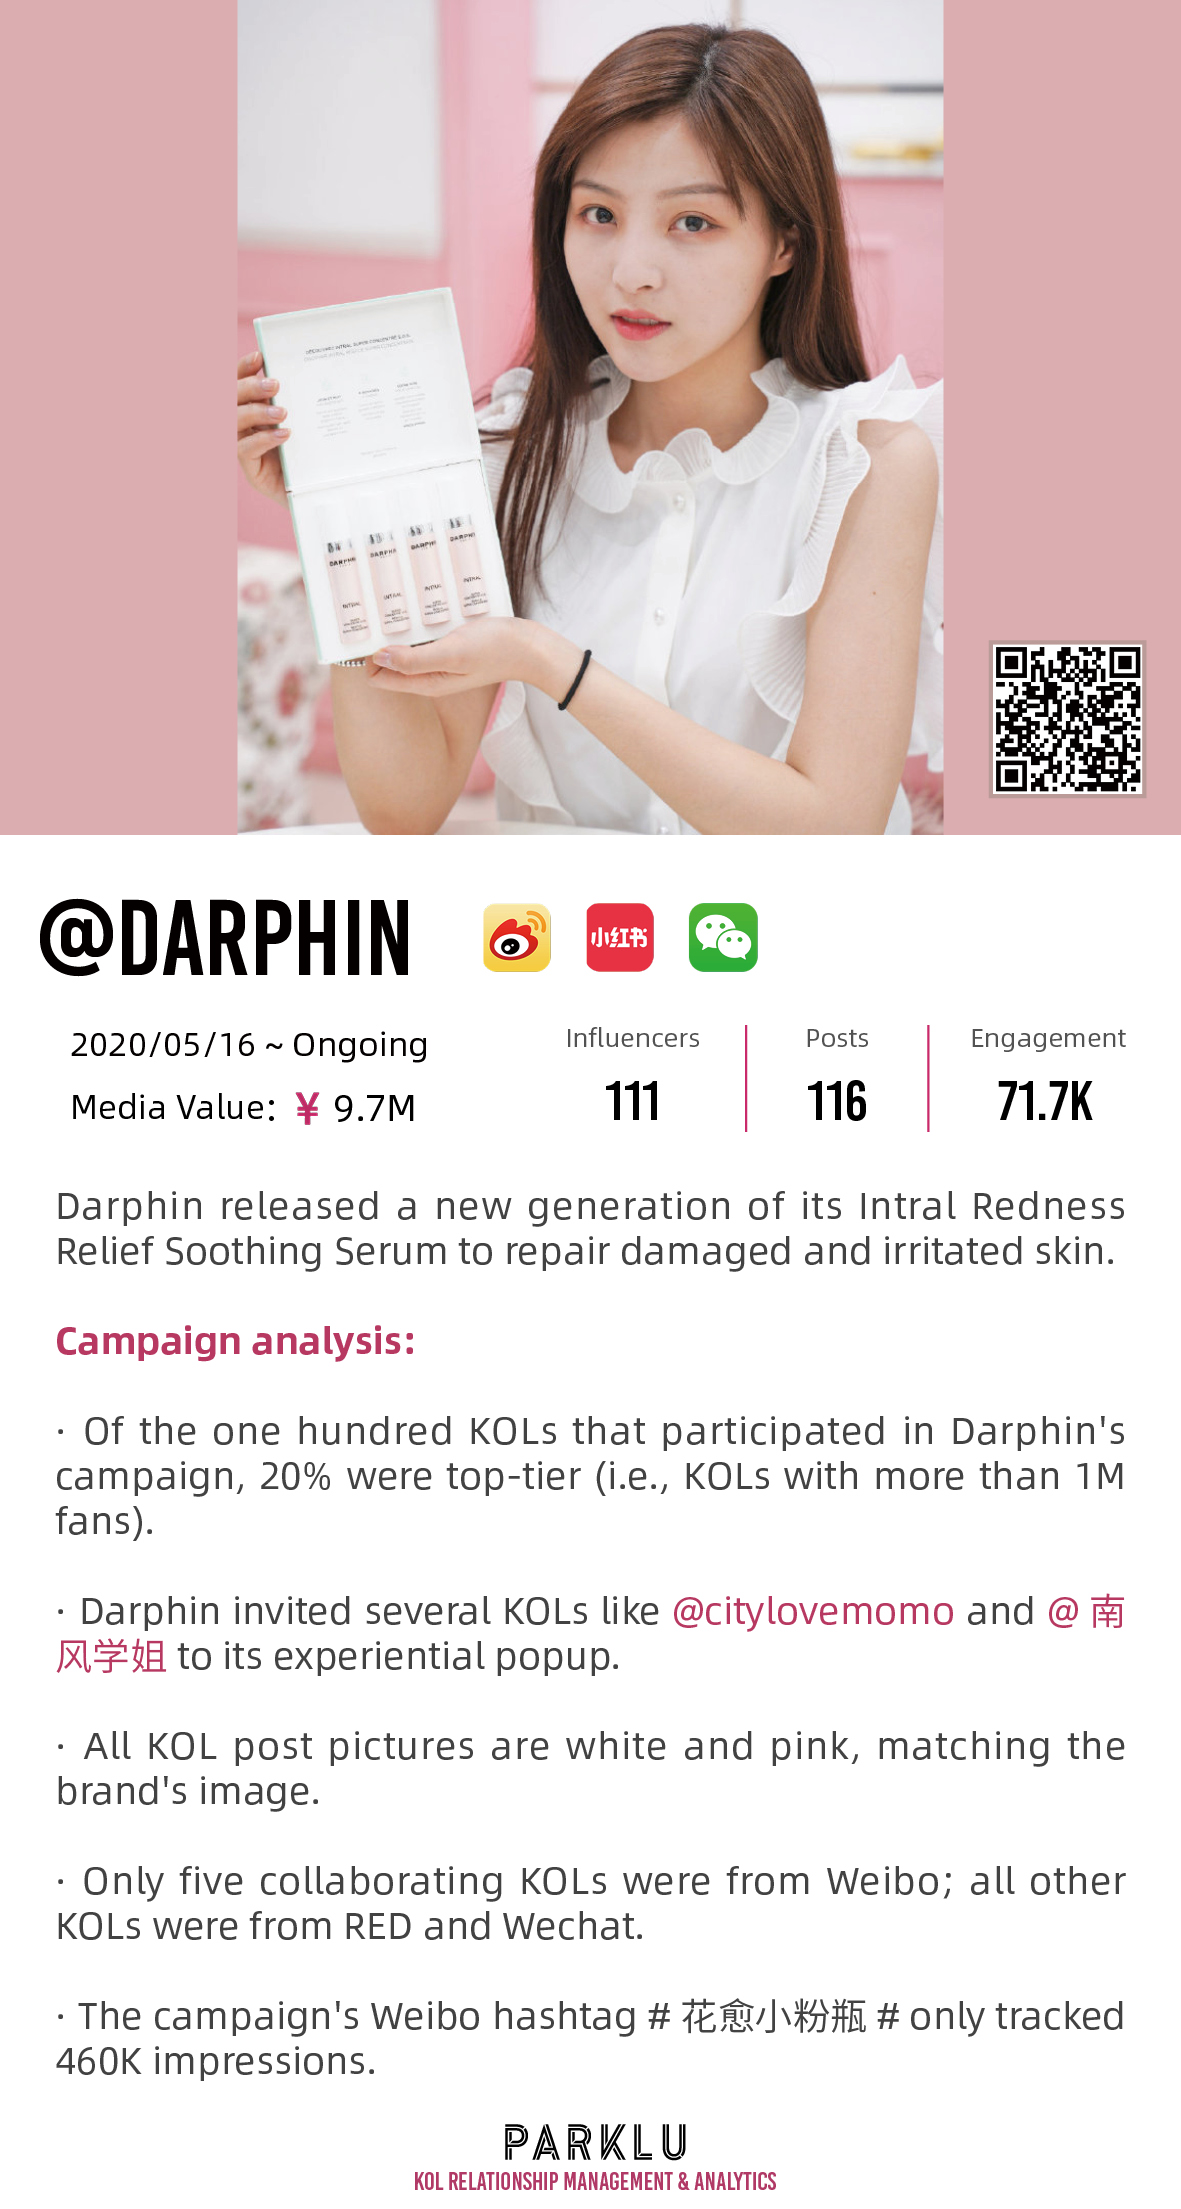 Darphin’s New Intral Redness Relief Soothing Serum